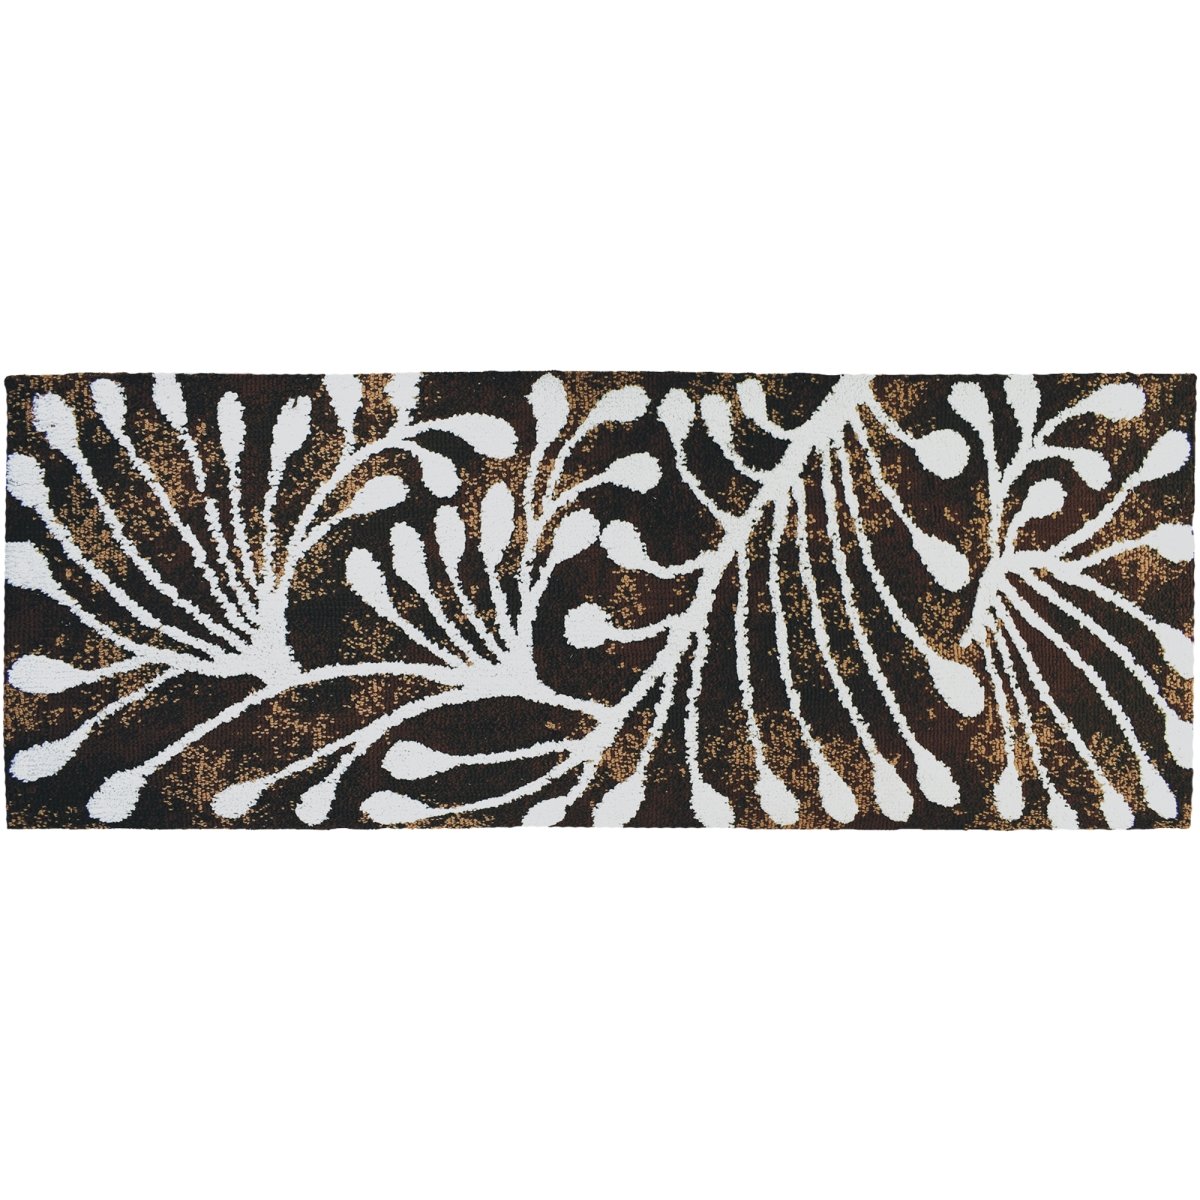 Ss-mp001j 21 X 54 In. Budding Branches Runner Rug